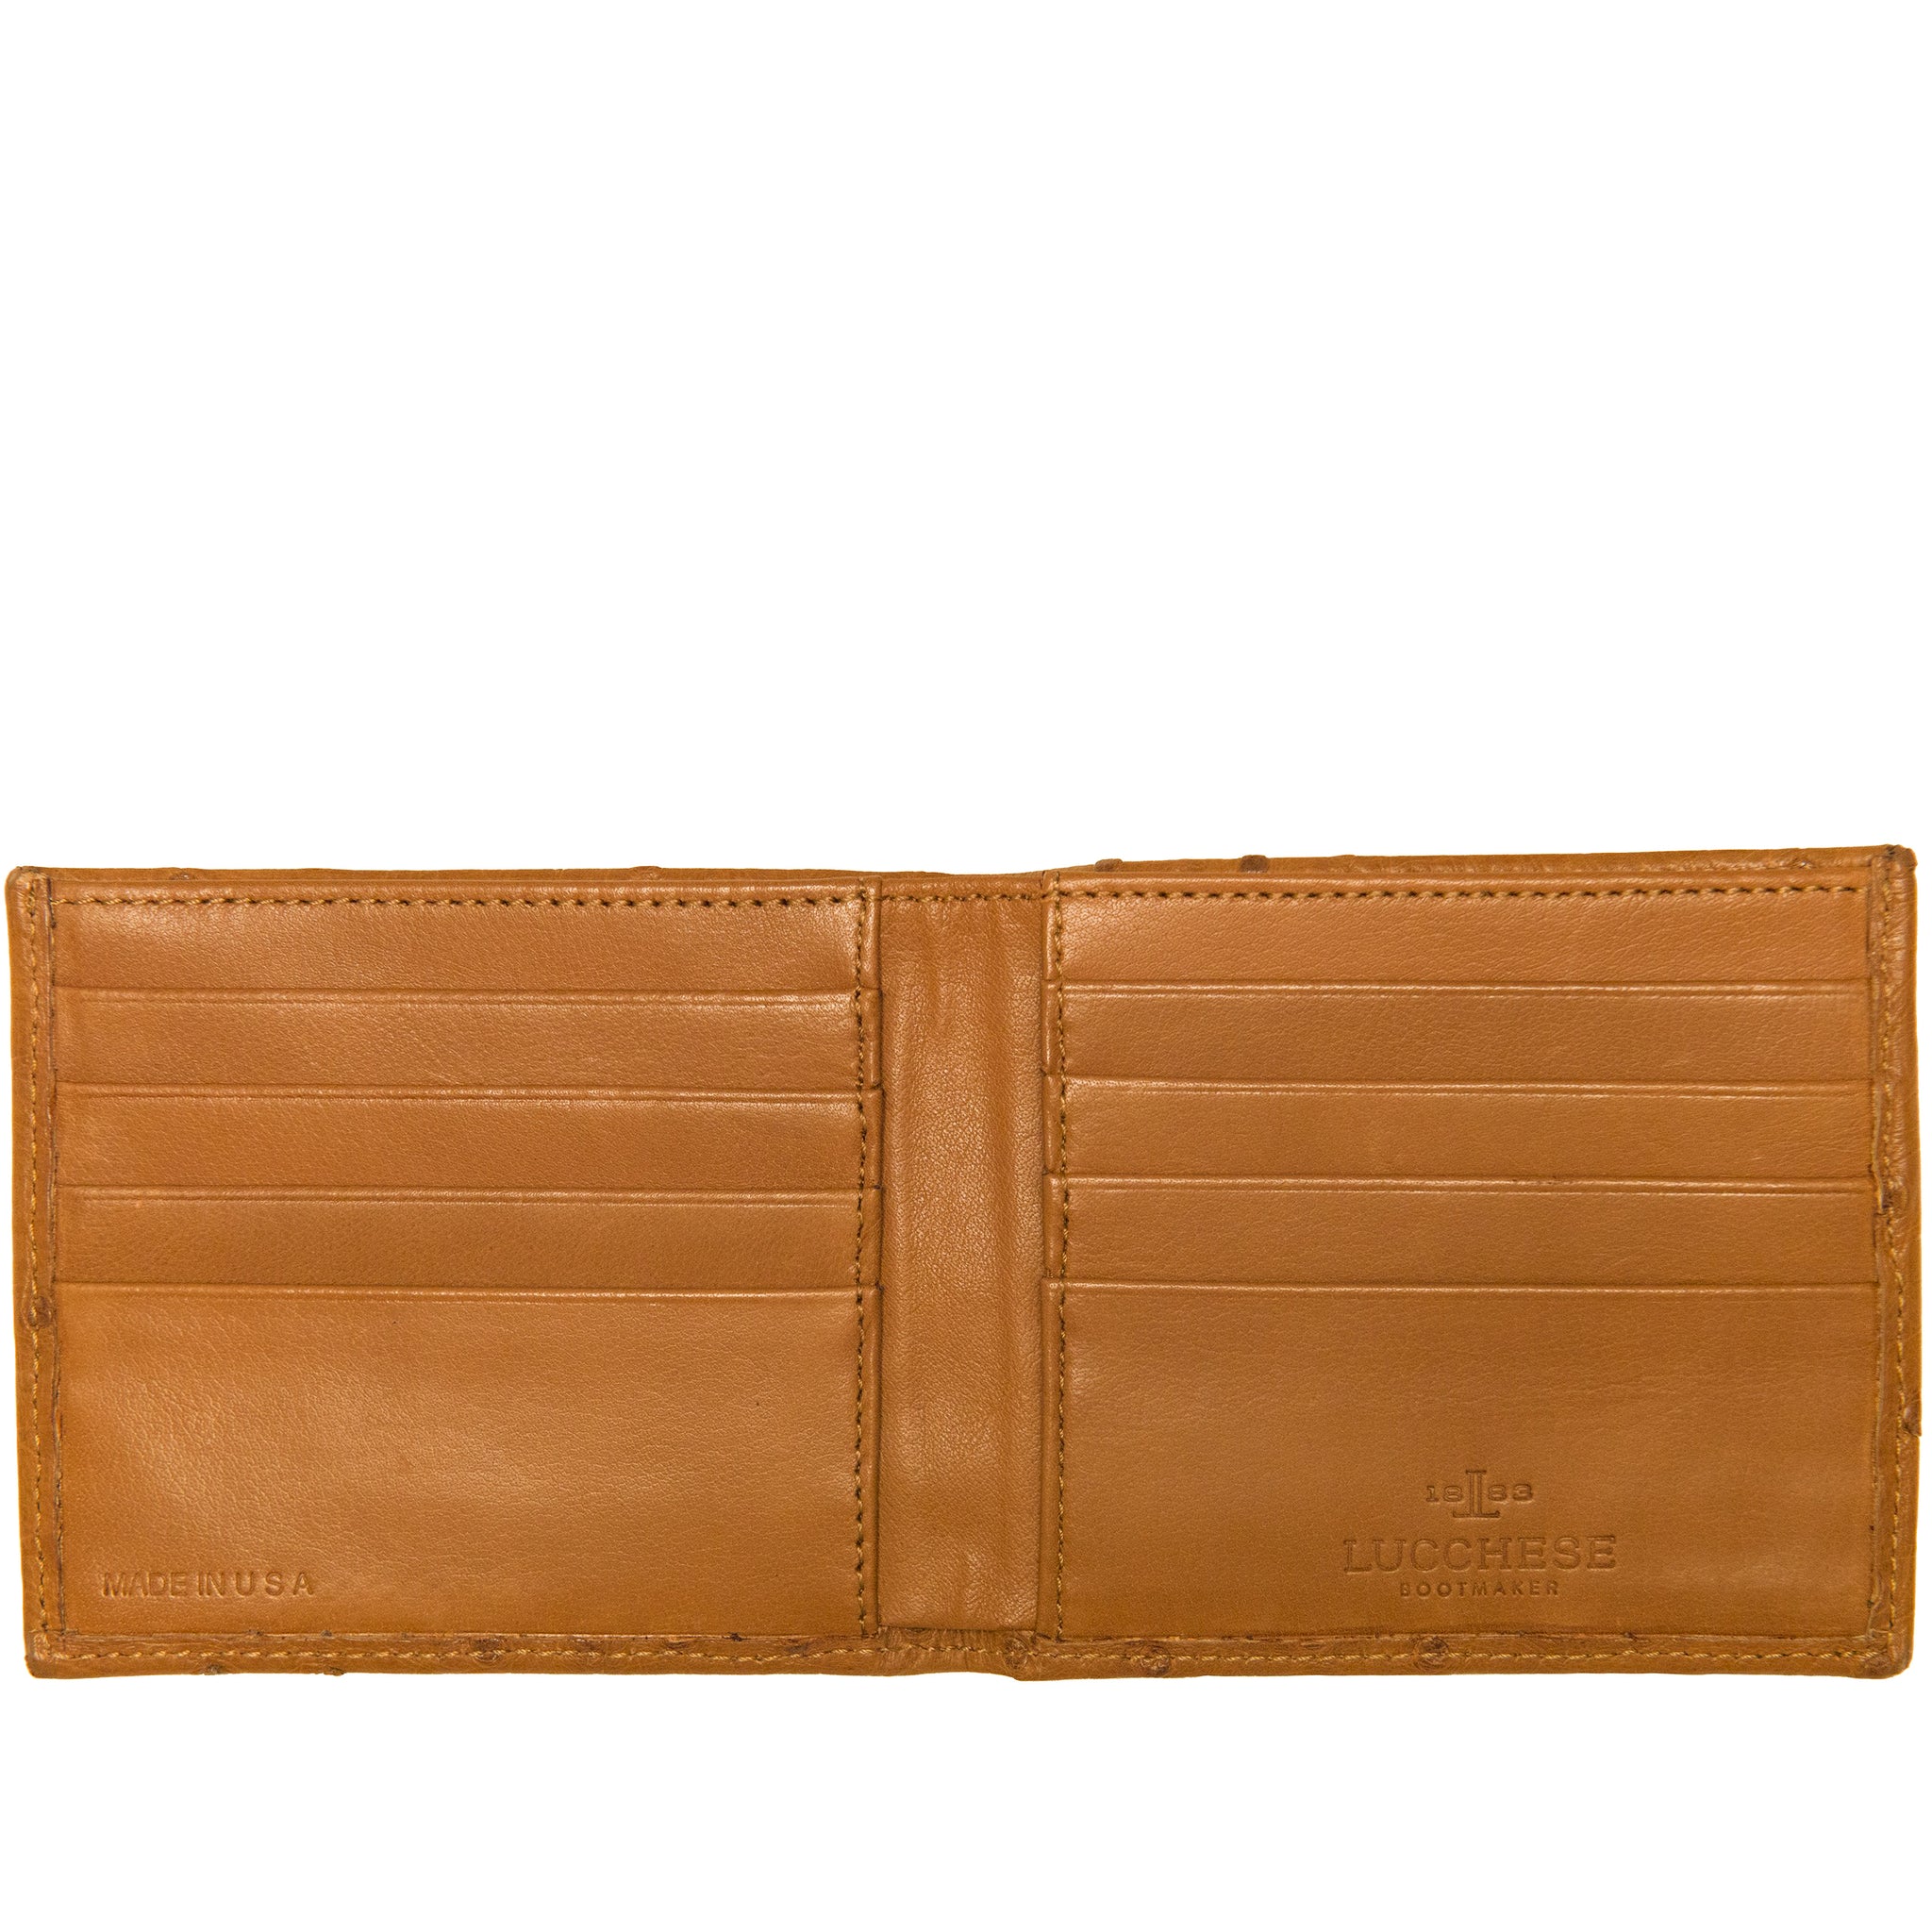 I can't decide which wallet to get : r/handbags